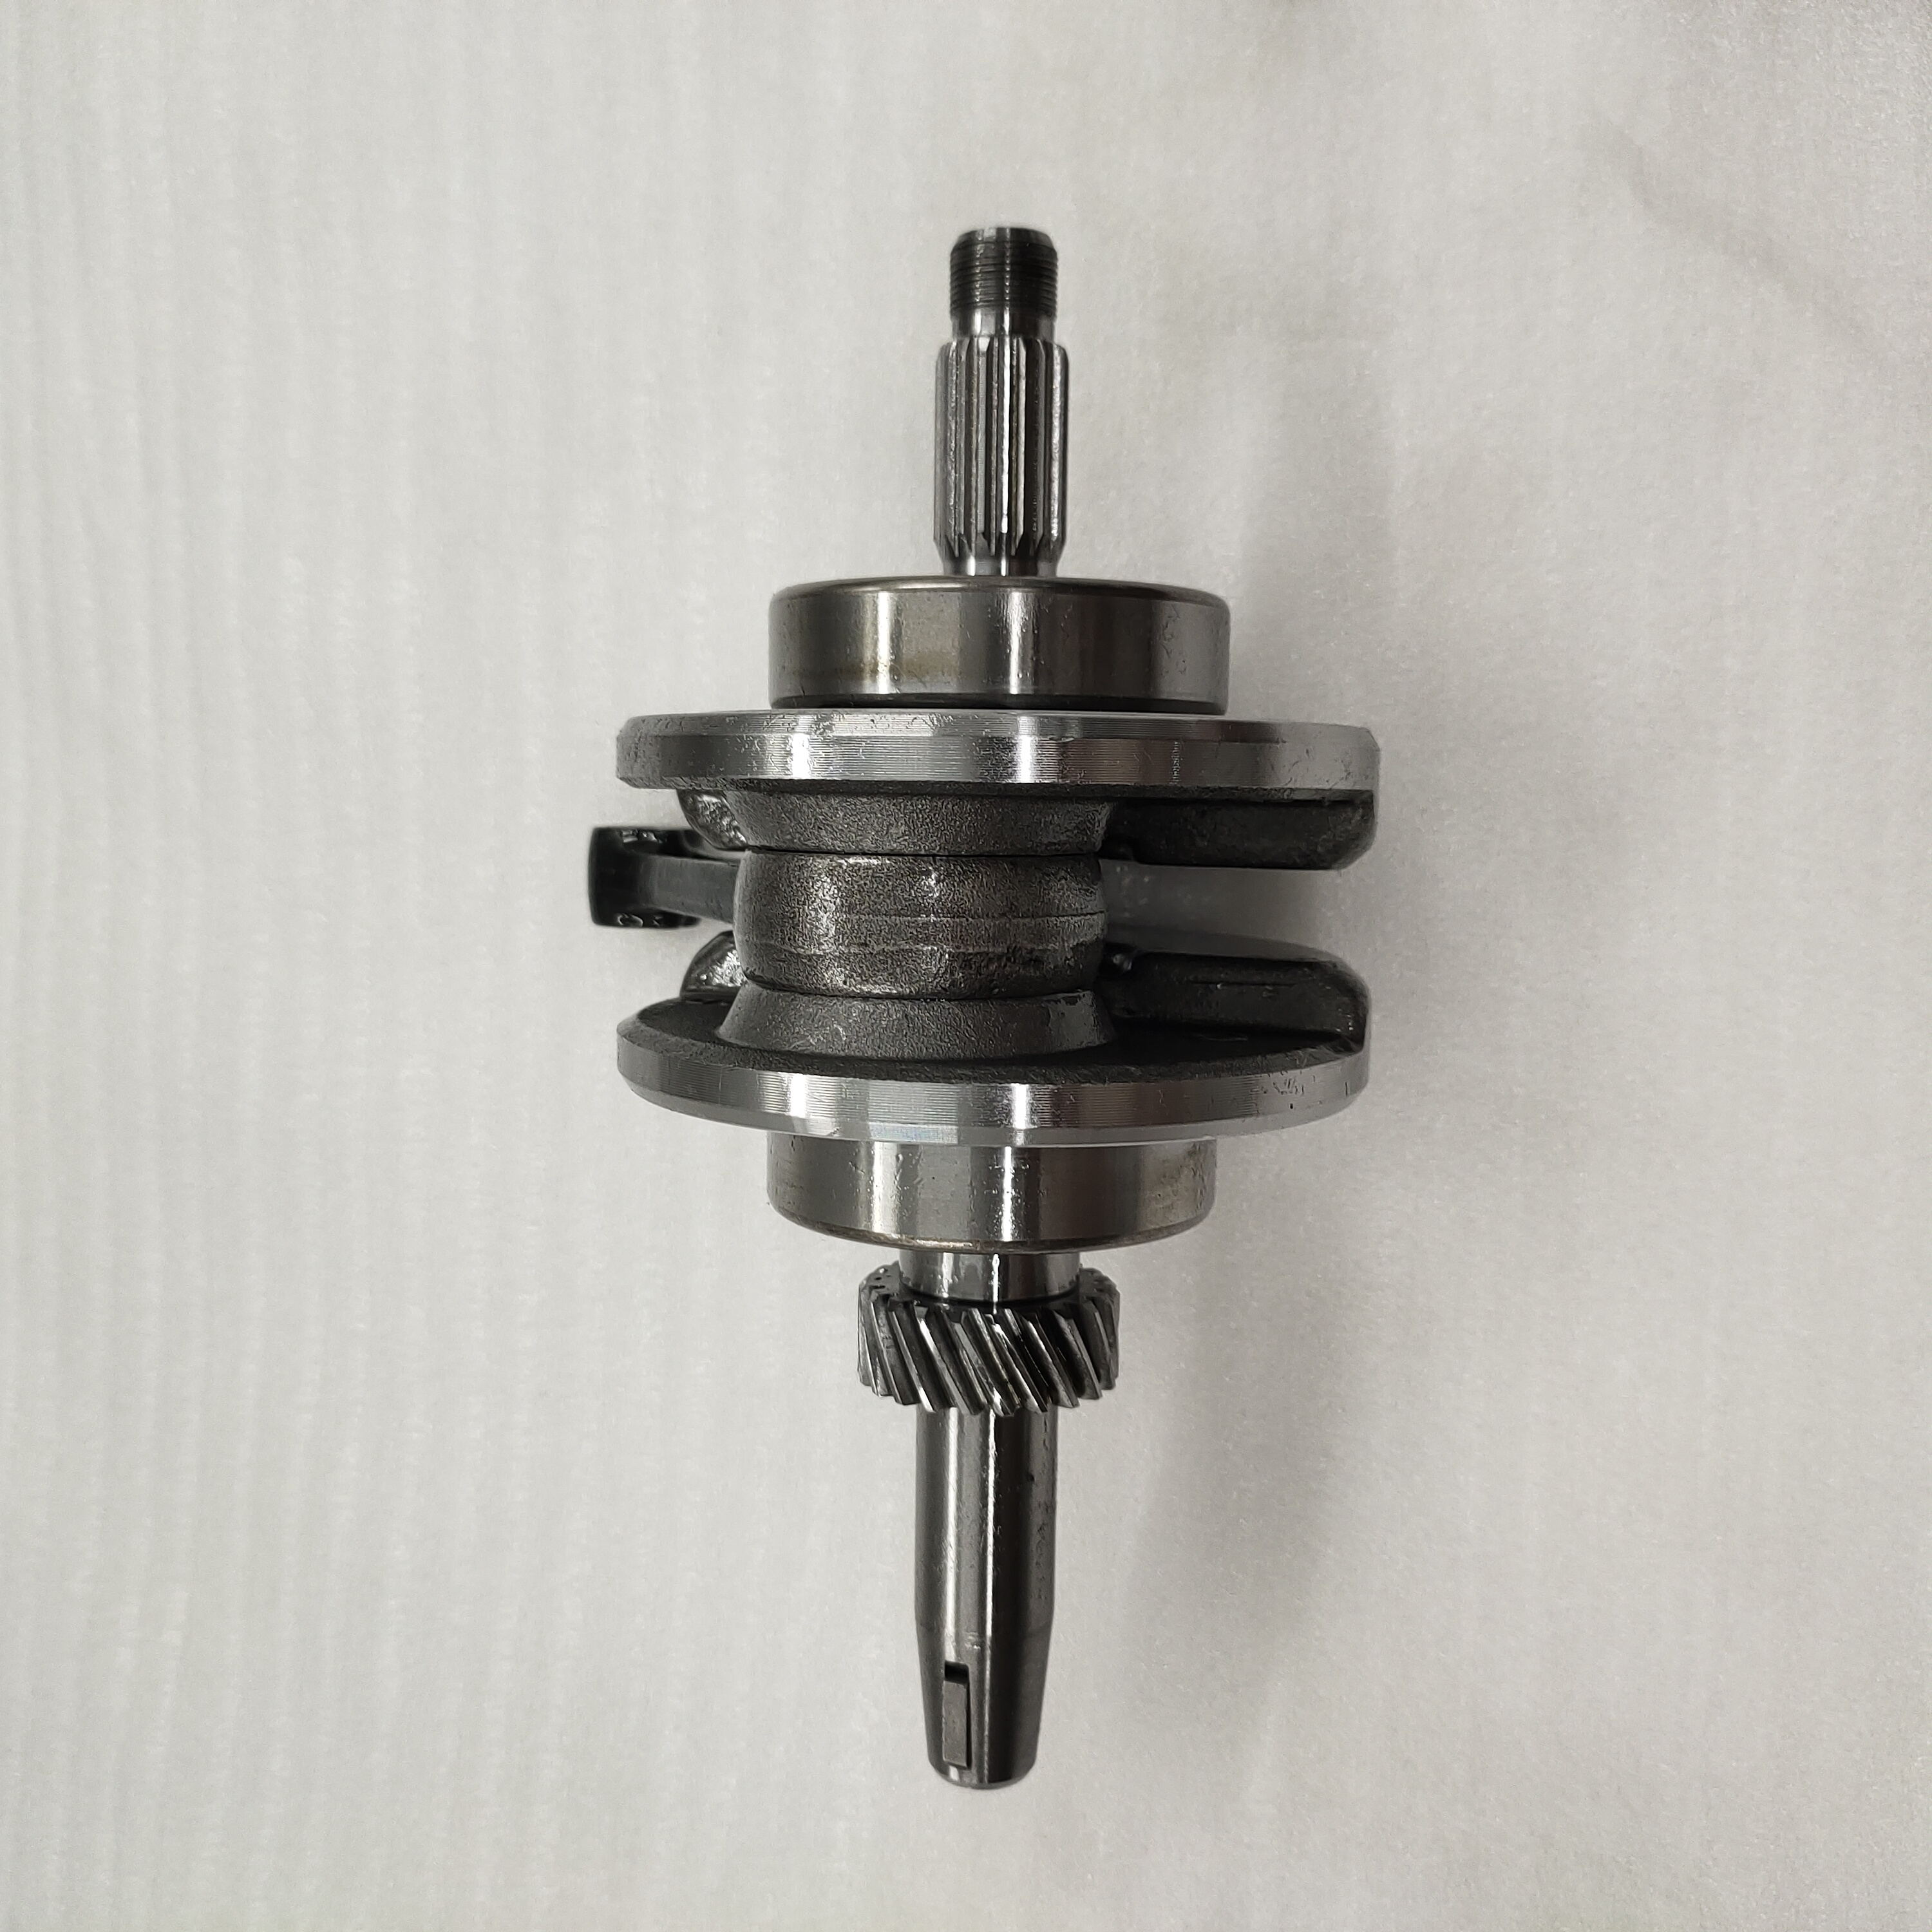 Tricycle Spare Parts lifan 150cc Motorcycle  Engine Crankshaft With Bearings Connecting Rod